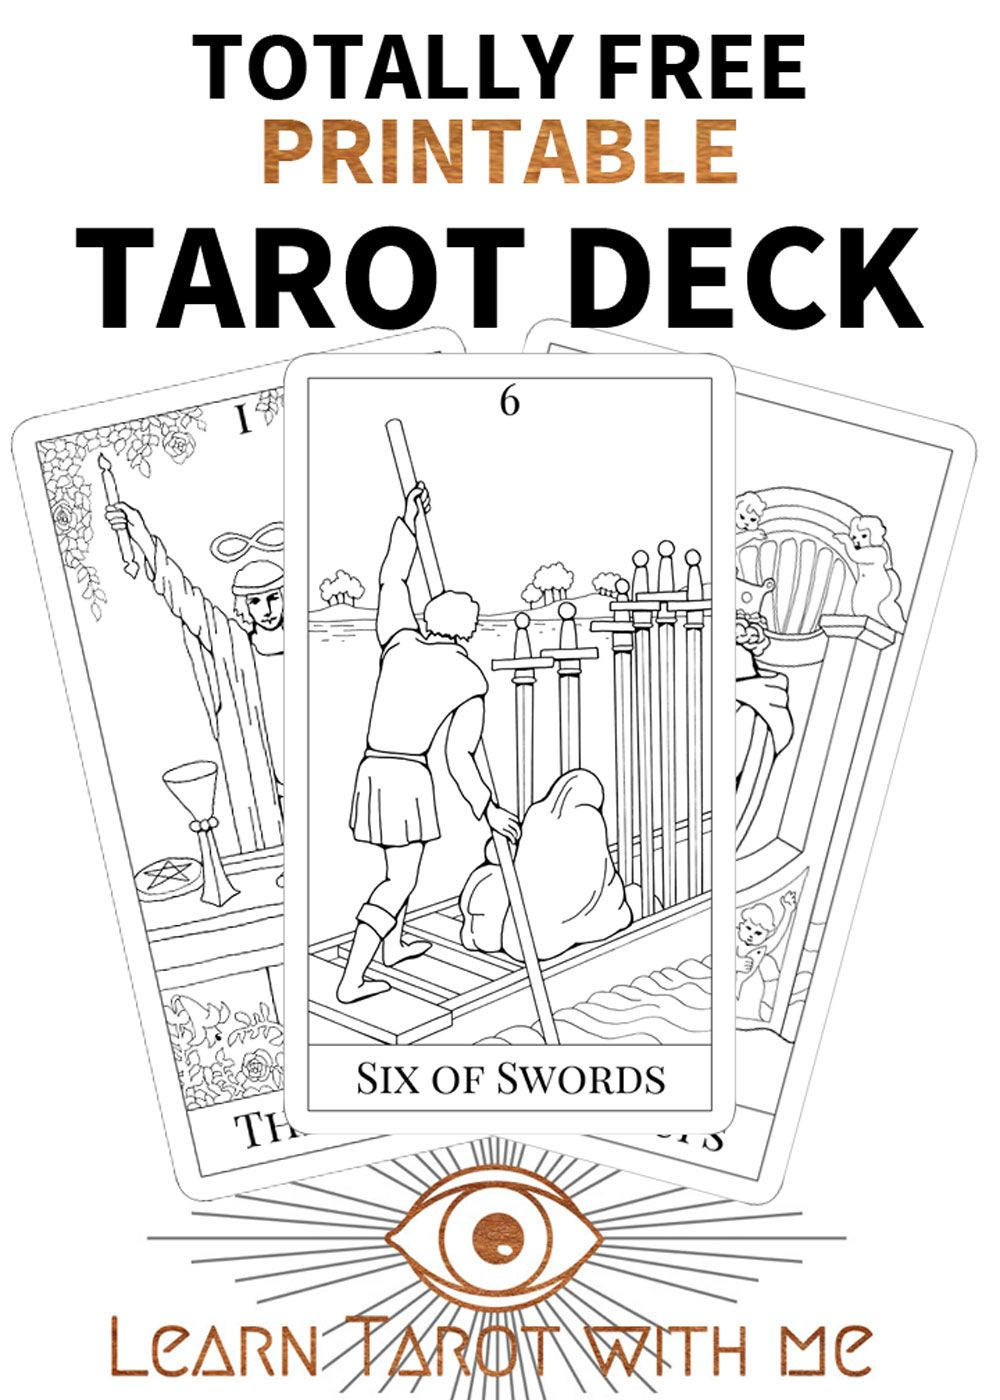 Get Your Totally Free, Printable Tarot Deck Of The Major Arcana - Free Printable Tarot Cards